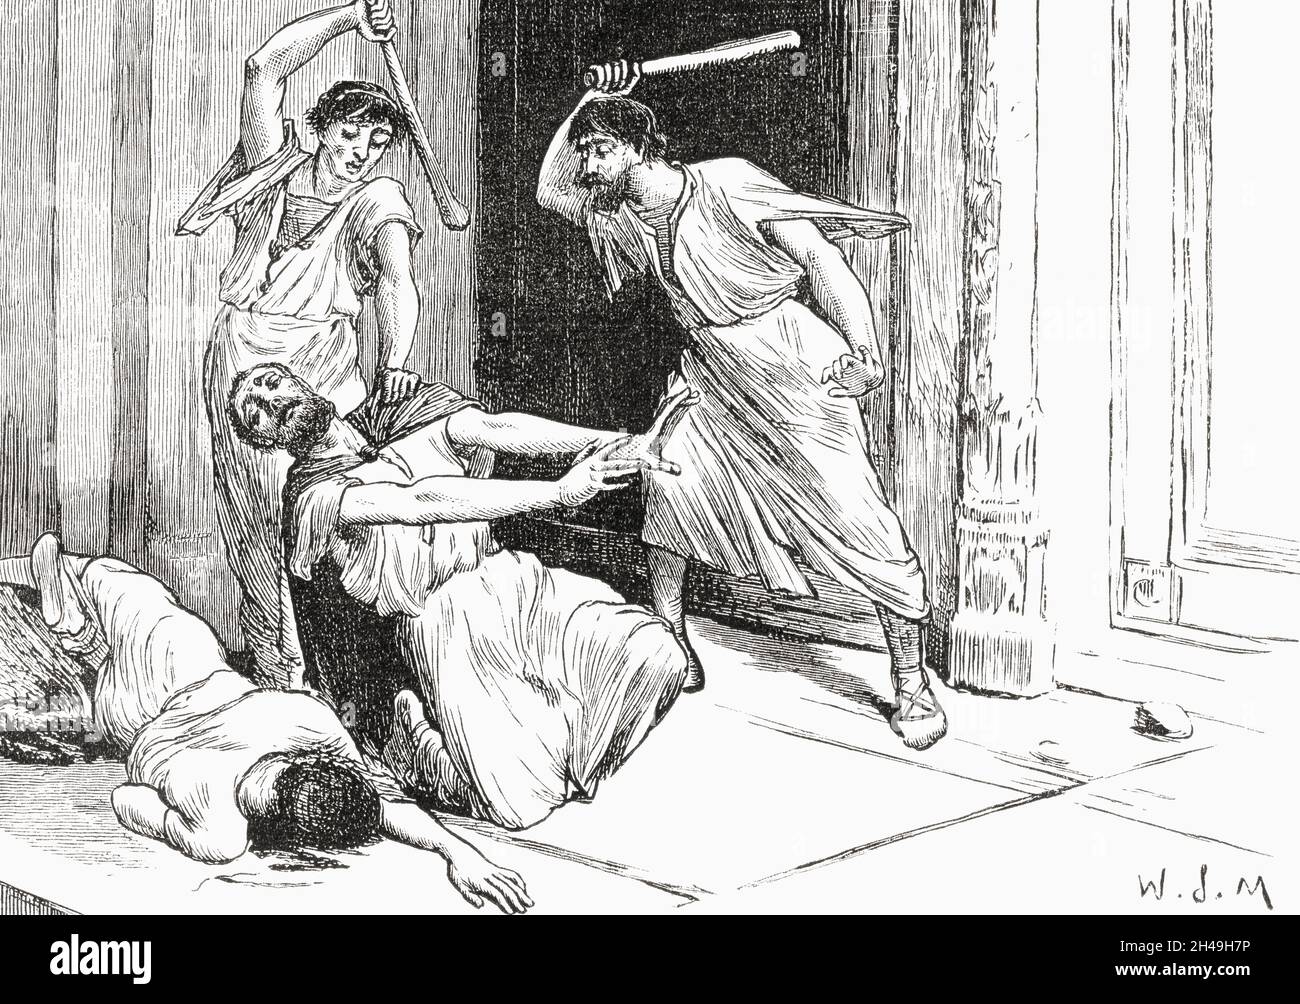 The murder of Tiberius Gracchus.  Tiberius Sempronius Gracchus, 163/162–133 BC. Popularis Roman politician best known for his agrarian reform law.  From Cassell's Illustrated Universal History, published 1883. Stock Photo